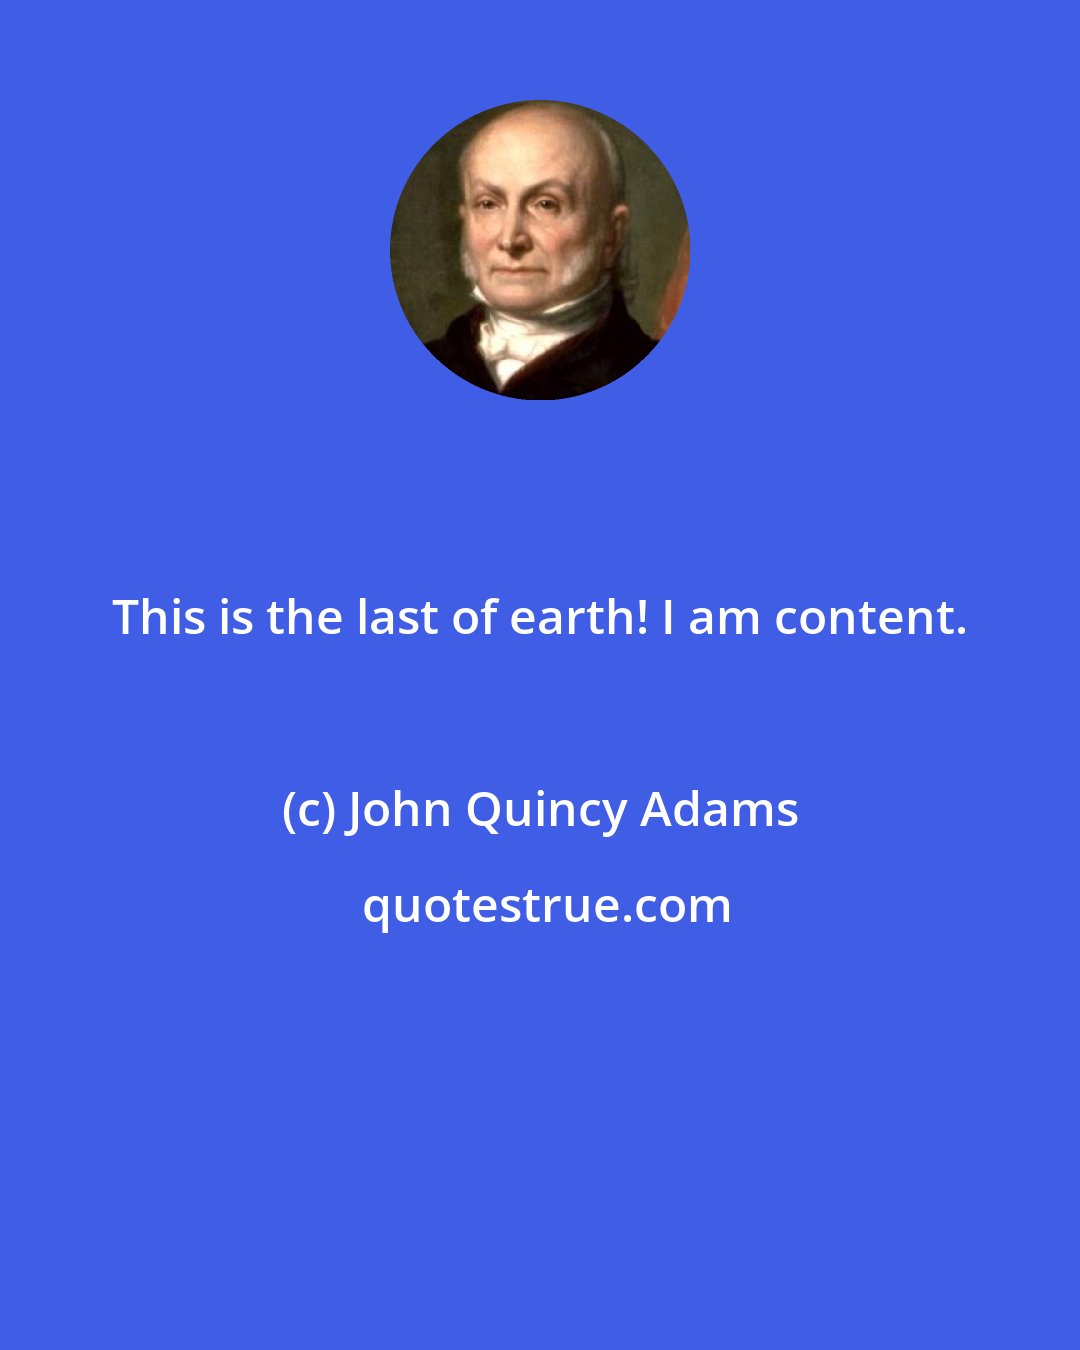 John Quincy Adams: This is the last of earth! I am content.